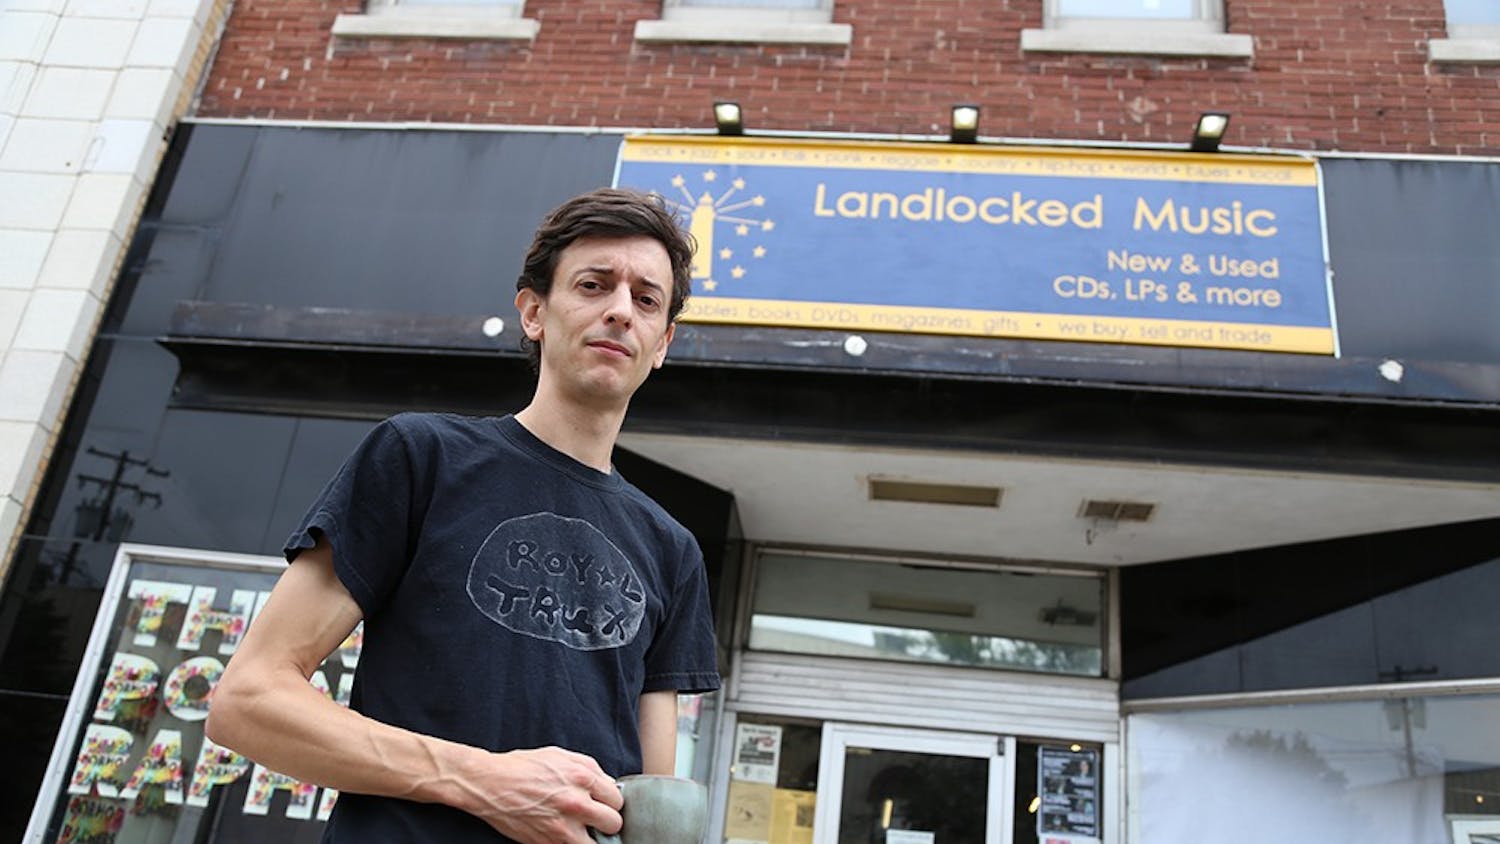 Co-owner Jason Nickey opened Landlocked Music in March 2006. 